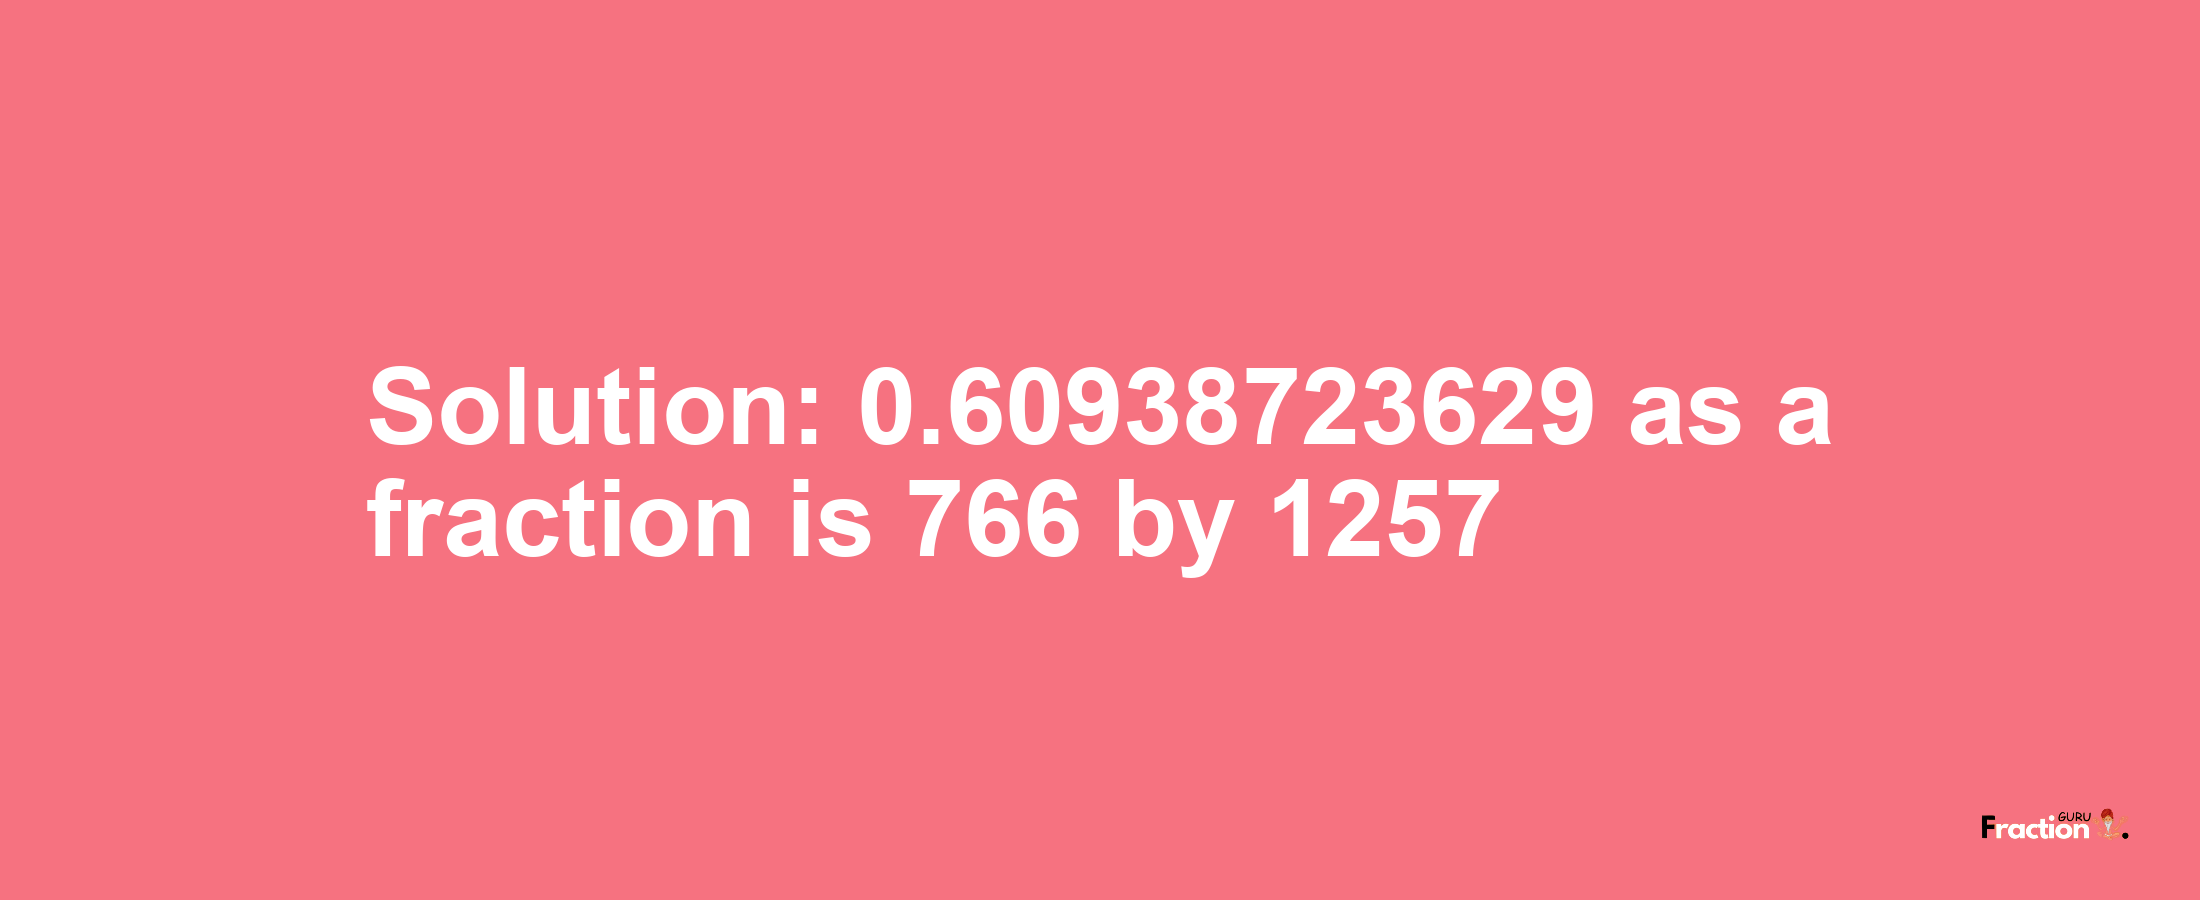 Solution:0.60938723629 as a fraction is 766/1257